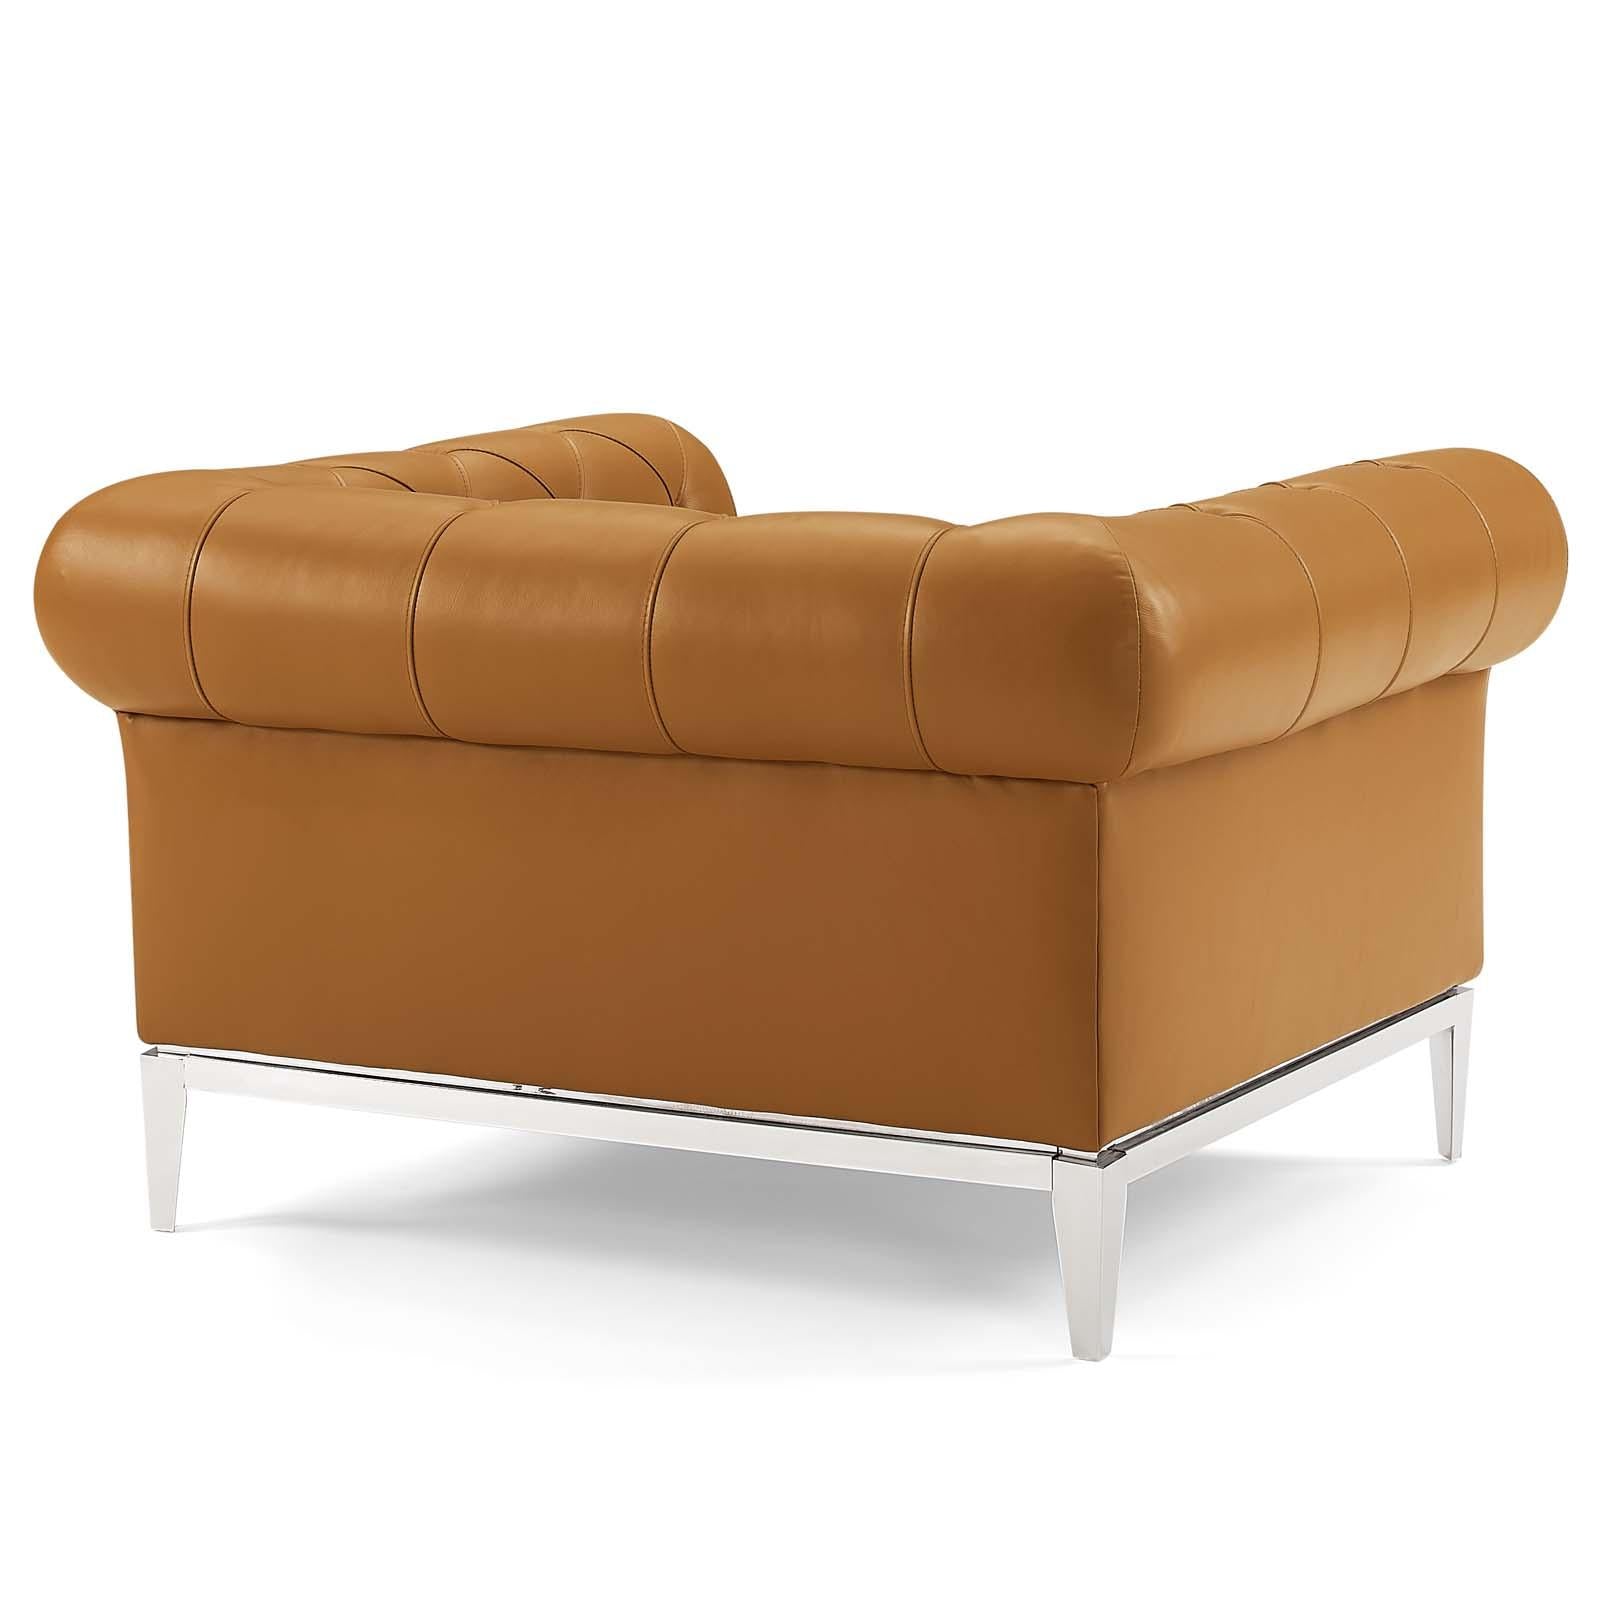 Modway Furniture Modern Idyll Tufted Upholstered Leather Loveseat and Armchair - EEI-4193